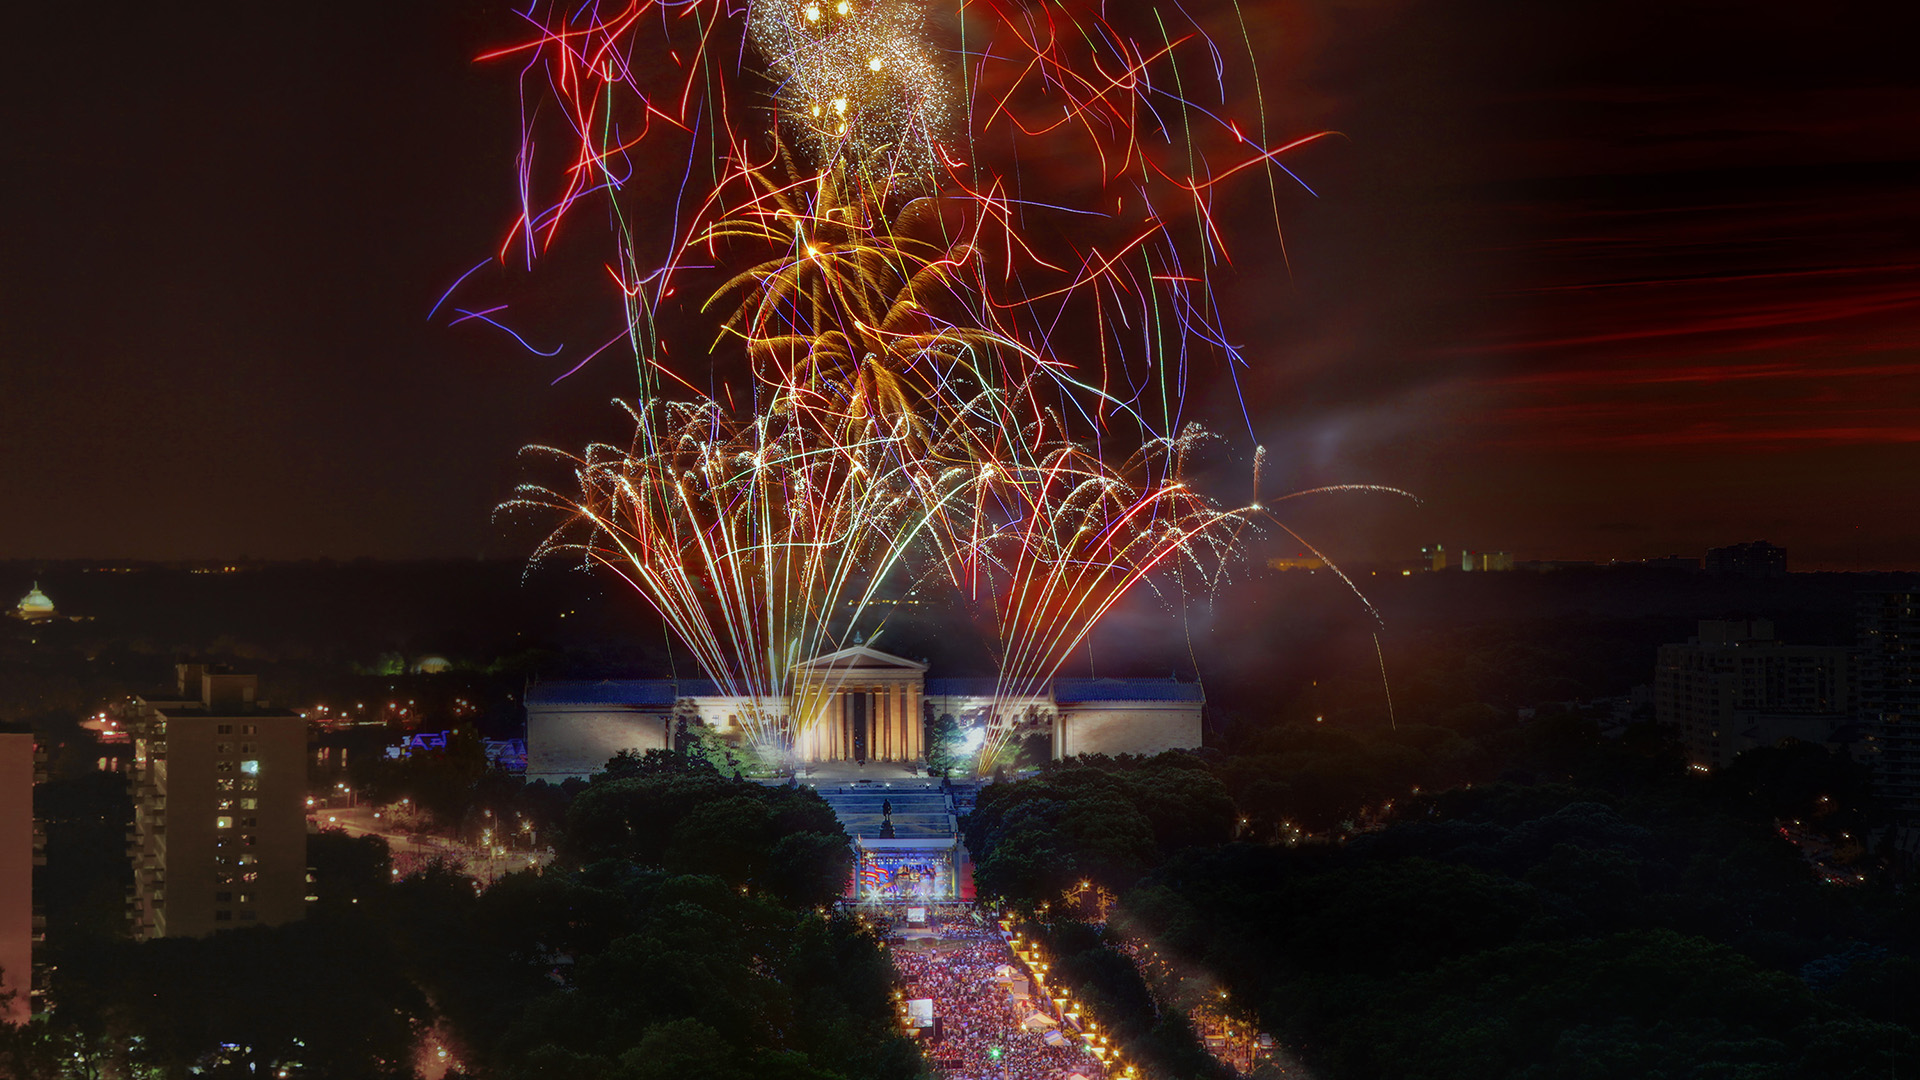 A huge fireworks display over the Philadelphia Museum of art. The Parkway is full of people and lights.